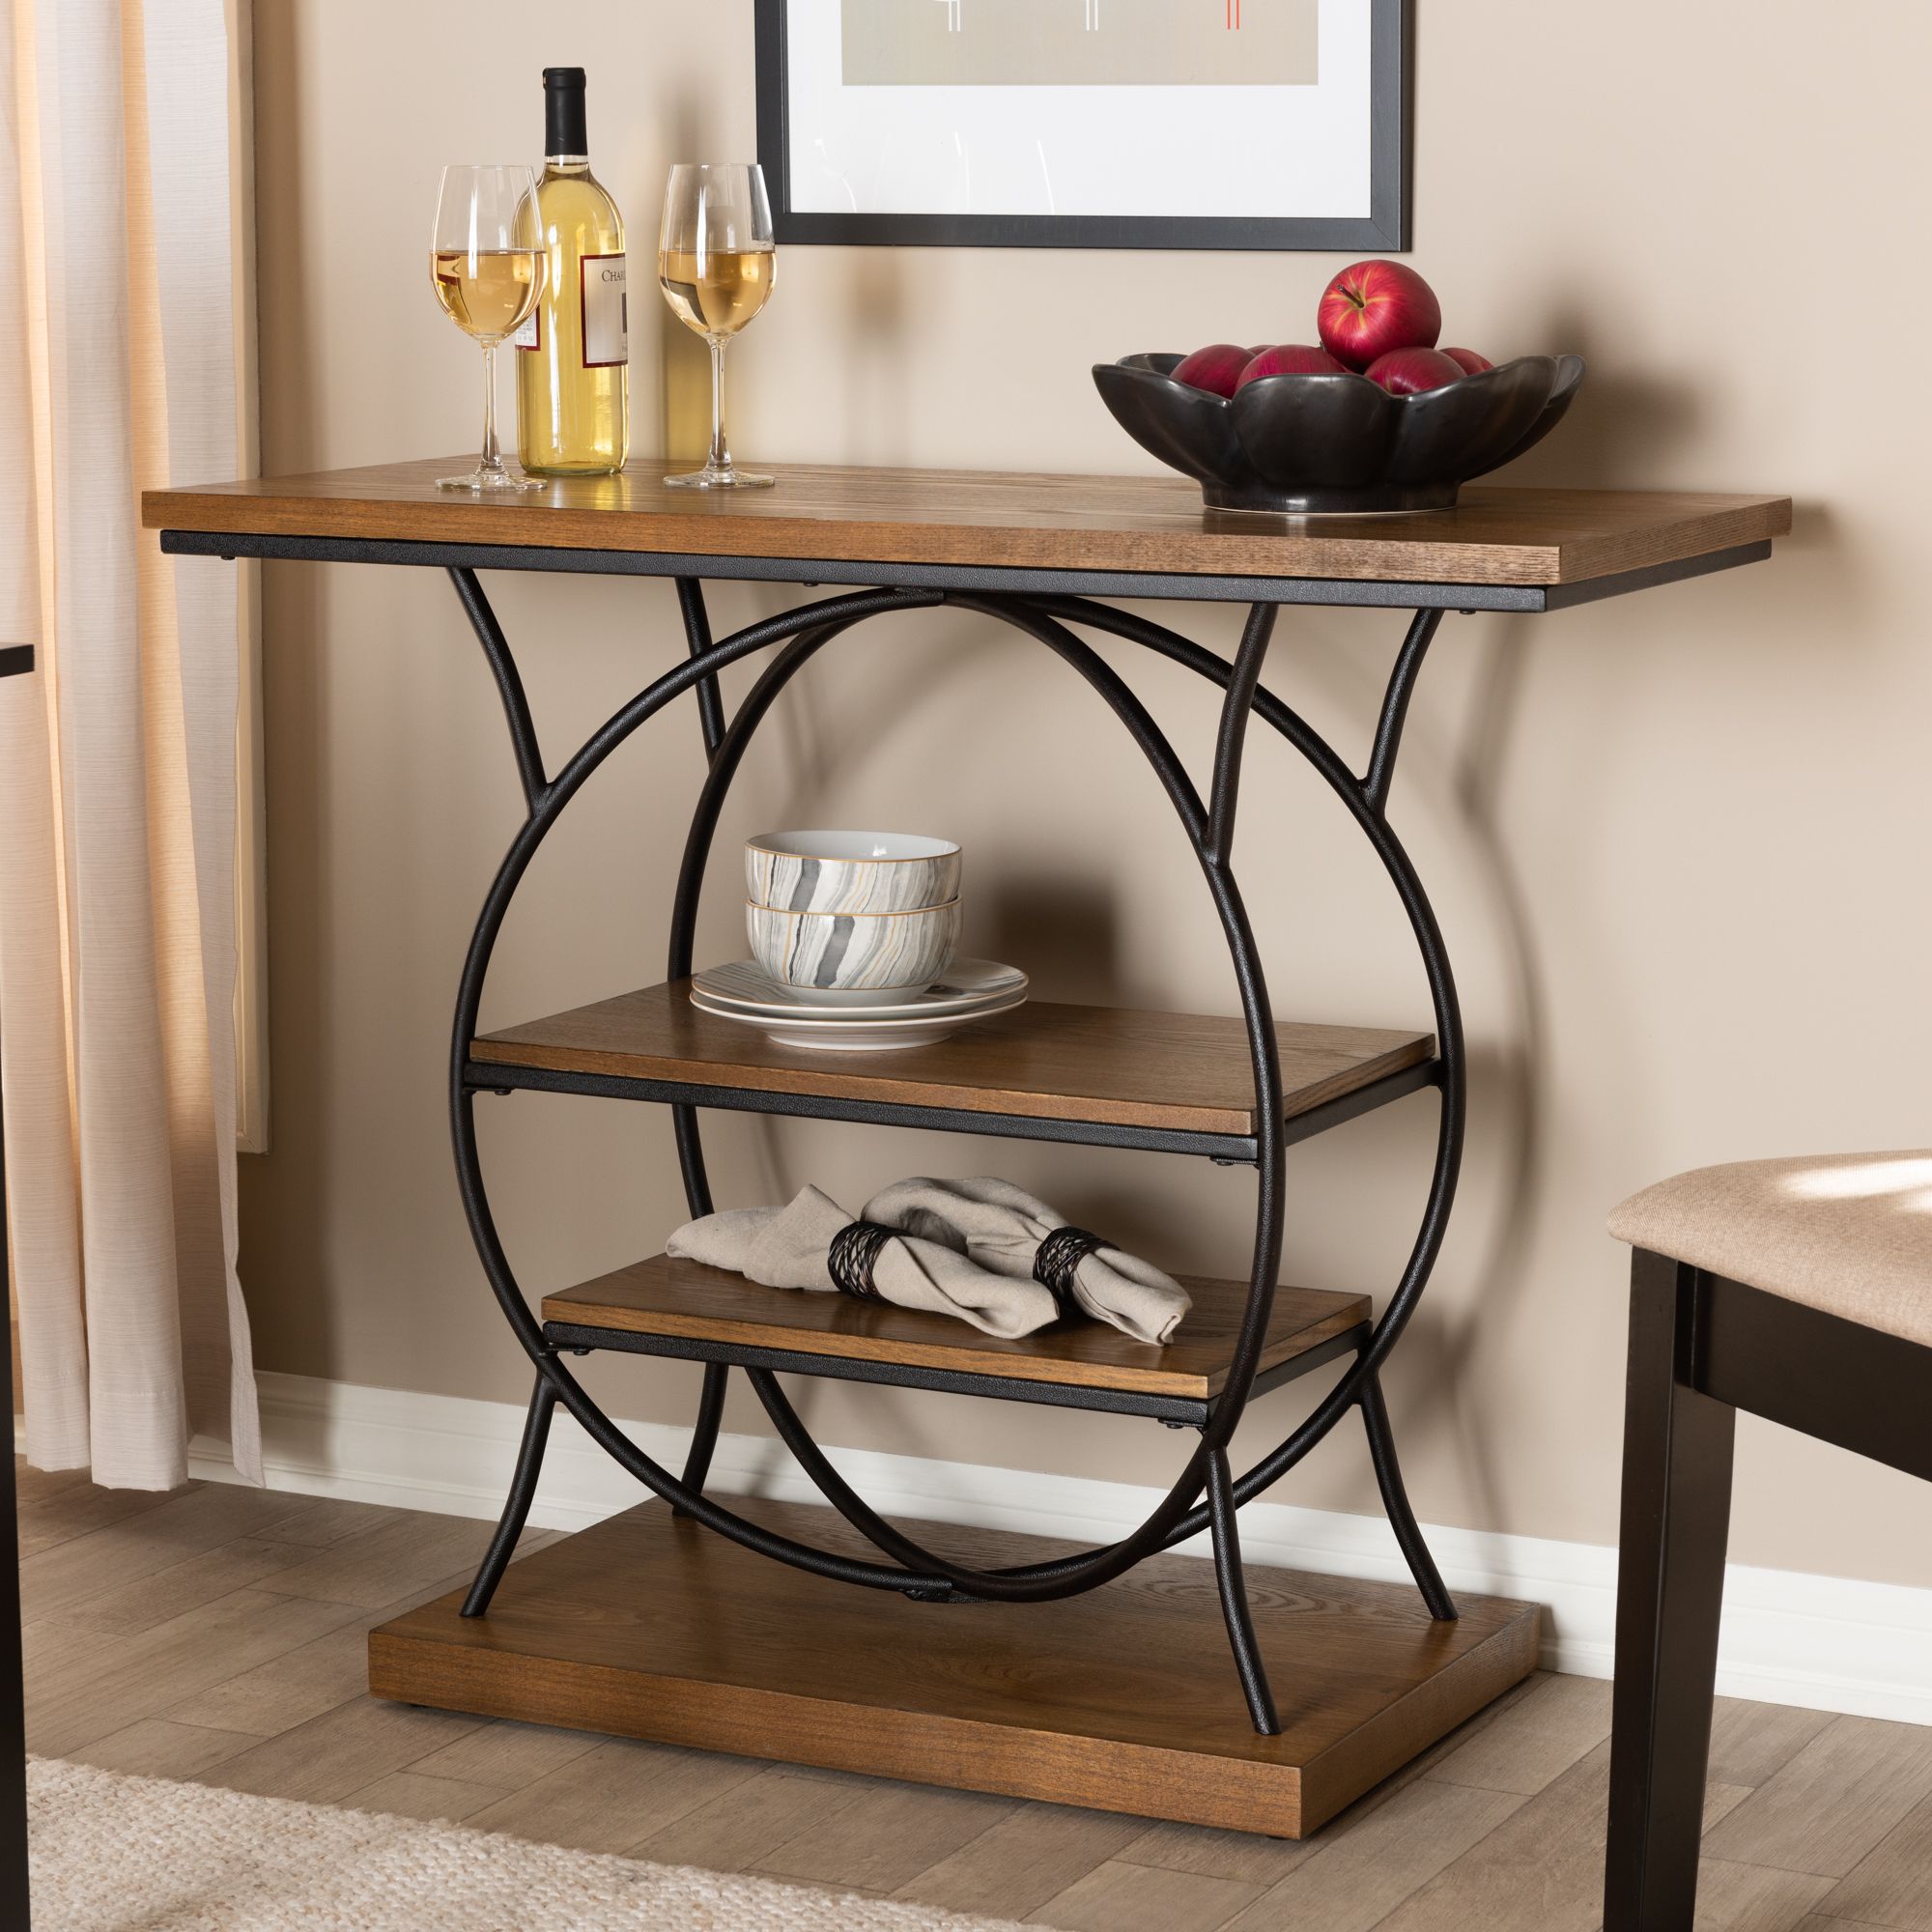 Baxton Studio Lavelle Vintage Rustic Industrial Style Intended For Antique Silver Metal Console Tables (View 5 of 20)